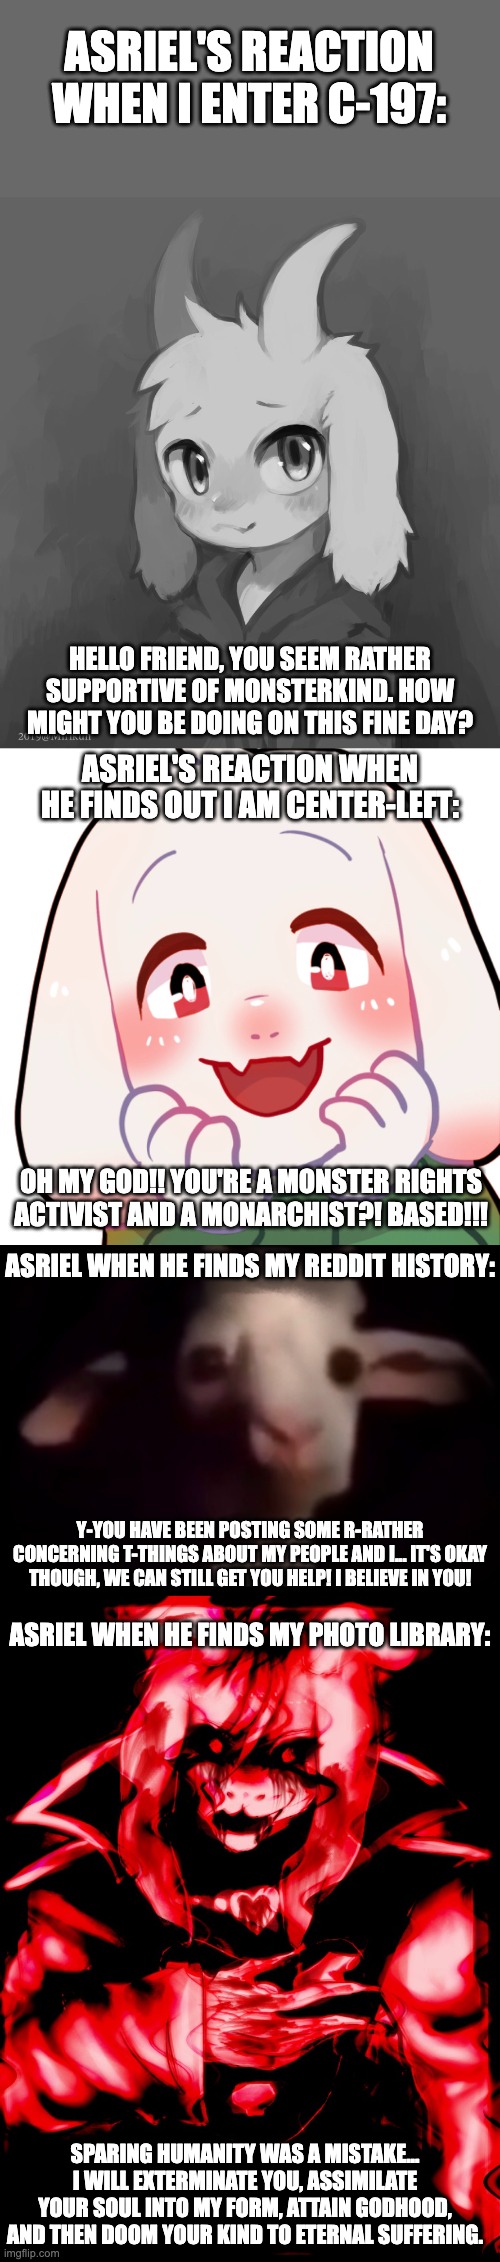 ASRIEL'S REACTION WHEN I ENTER C-197:; HELLO FRIEND, YOU SEEM RATHER SUPPORTIVE OF MONSTERKIND. HOW MIGHT YOU BE DOING ON THIS FINE DAY? ASRIEL'S REACTION WHEN HE FINDS OUT I AM CENTER-LEFT:; OH MY GOD!! YOU'RE A MONSTER RIGHTS ACTIVIST AND A MONARCHIST?! BASED!!! ASRIEL WHEN HE FINDS MY REDDIT HISTORY:; Y-YOU HAVE BEEN POSTING SOME R-RATHER CONCERNING T-THINGS ABOUT MY PEOPLE AND I... IT'S OKAY THOUGH, WE CAN STILL GET YOU HELP! I BELIEVE IN YOU! ASRIEL WHEN HE FINDS MY PHOTO LIBRARY:; SPARING HUMANITY WAS A MISTAKE... I WILL EXTERMINATE YOU, ASSIMILATE YOUR SOUL INTO MY FORM, ATTAIN GODHOOD, AND THEN DOOM YOUR KIND TO ETERNAL SUFFERING. | image tagged in asriel,undertale,c197,dimensional merge,fanfiction,existential horror | made w/ Imgflip meme maker